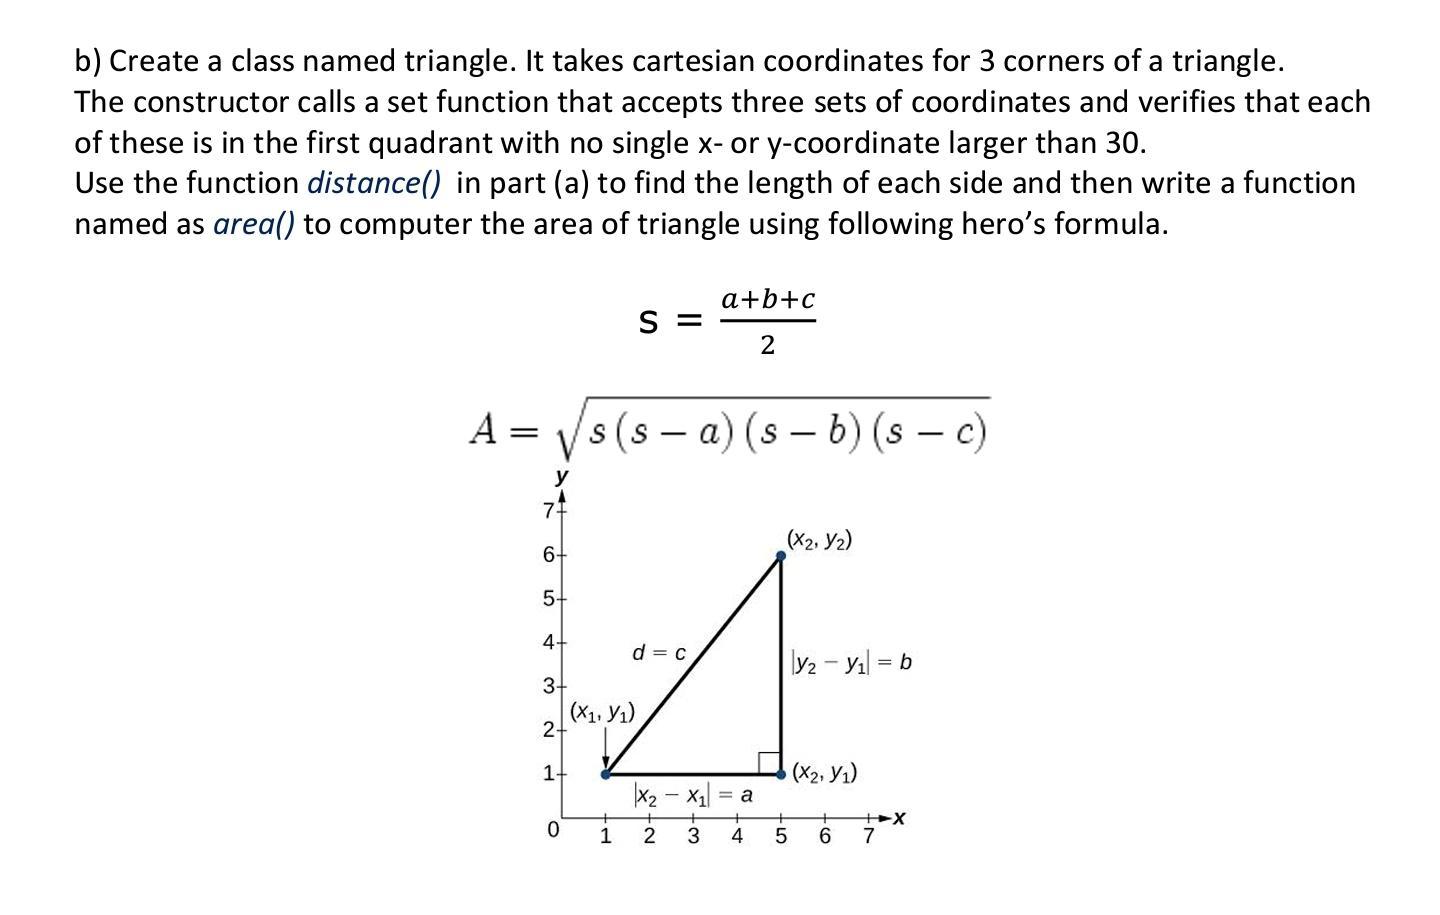 b) Create a class named triangle. It takes cartesian coordinates for 3 corners of a triangle. The constructor